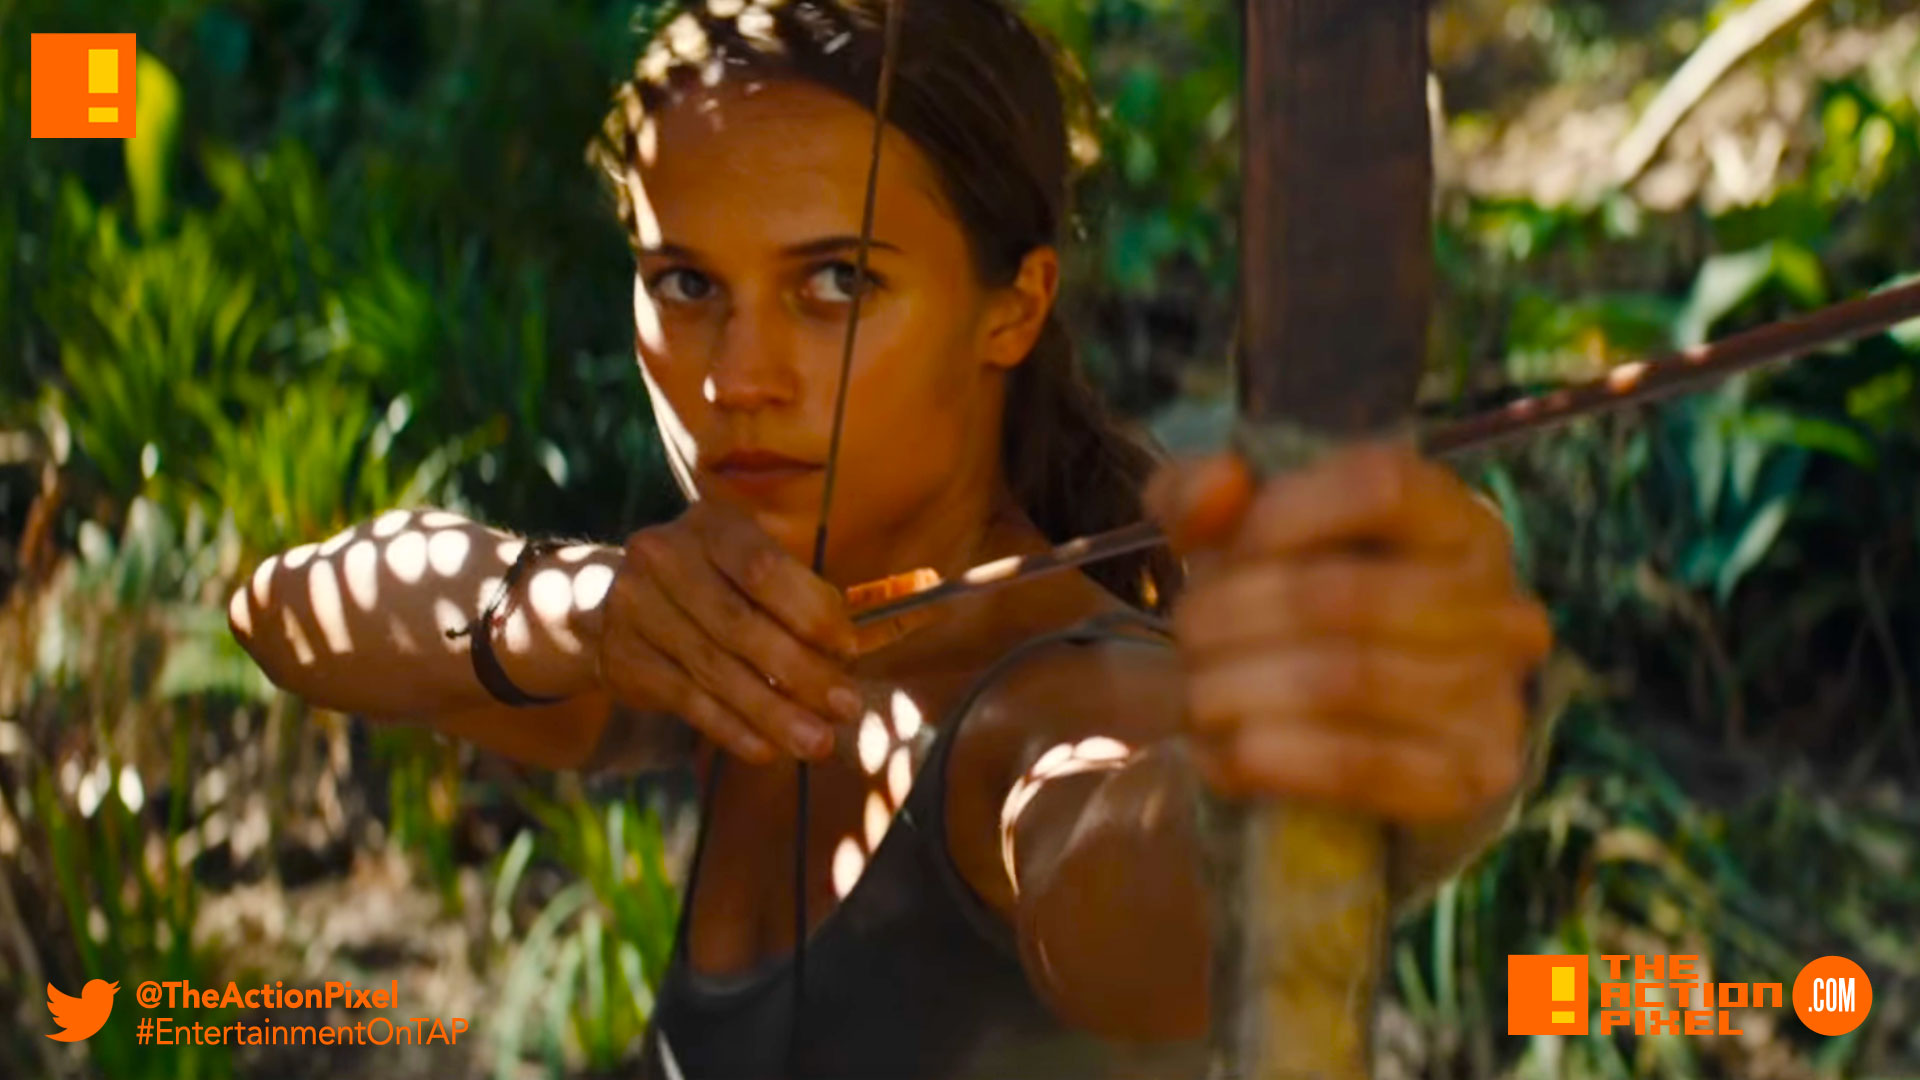 trailer, TOMB RAIDER, ALICIA vikander, lara croft, first look, entertainment on tap, the action pixel,